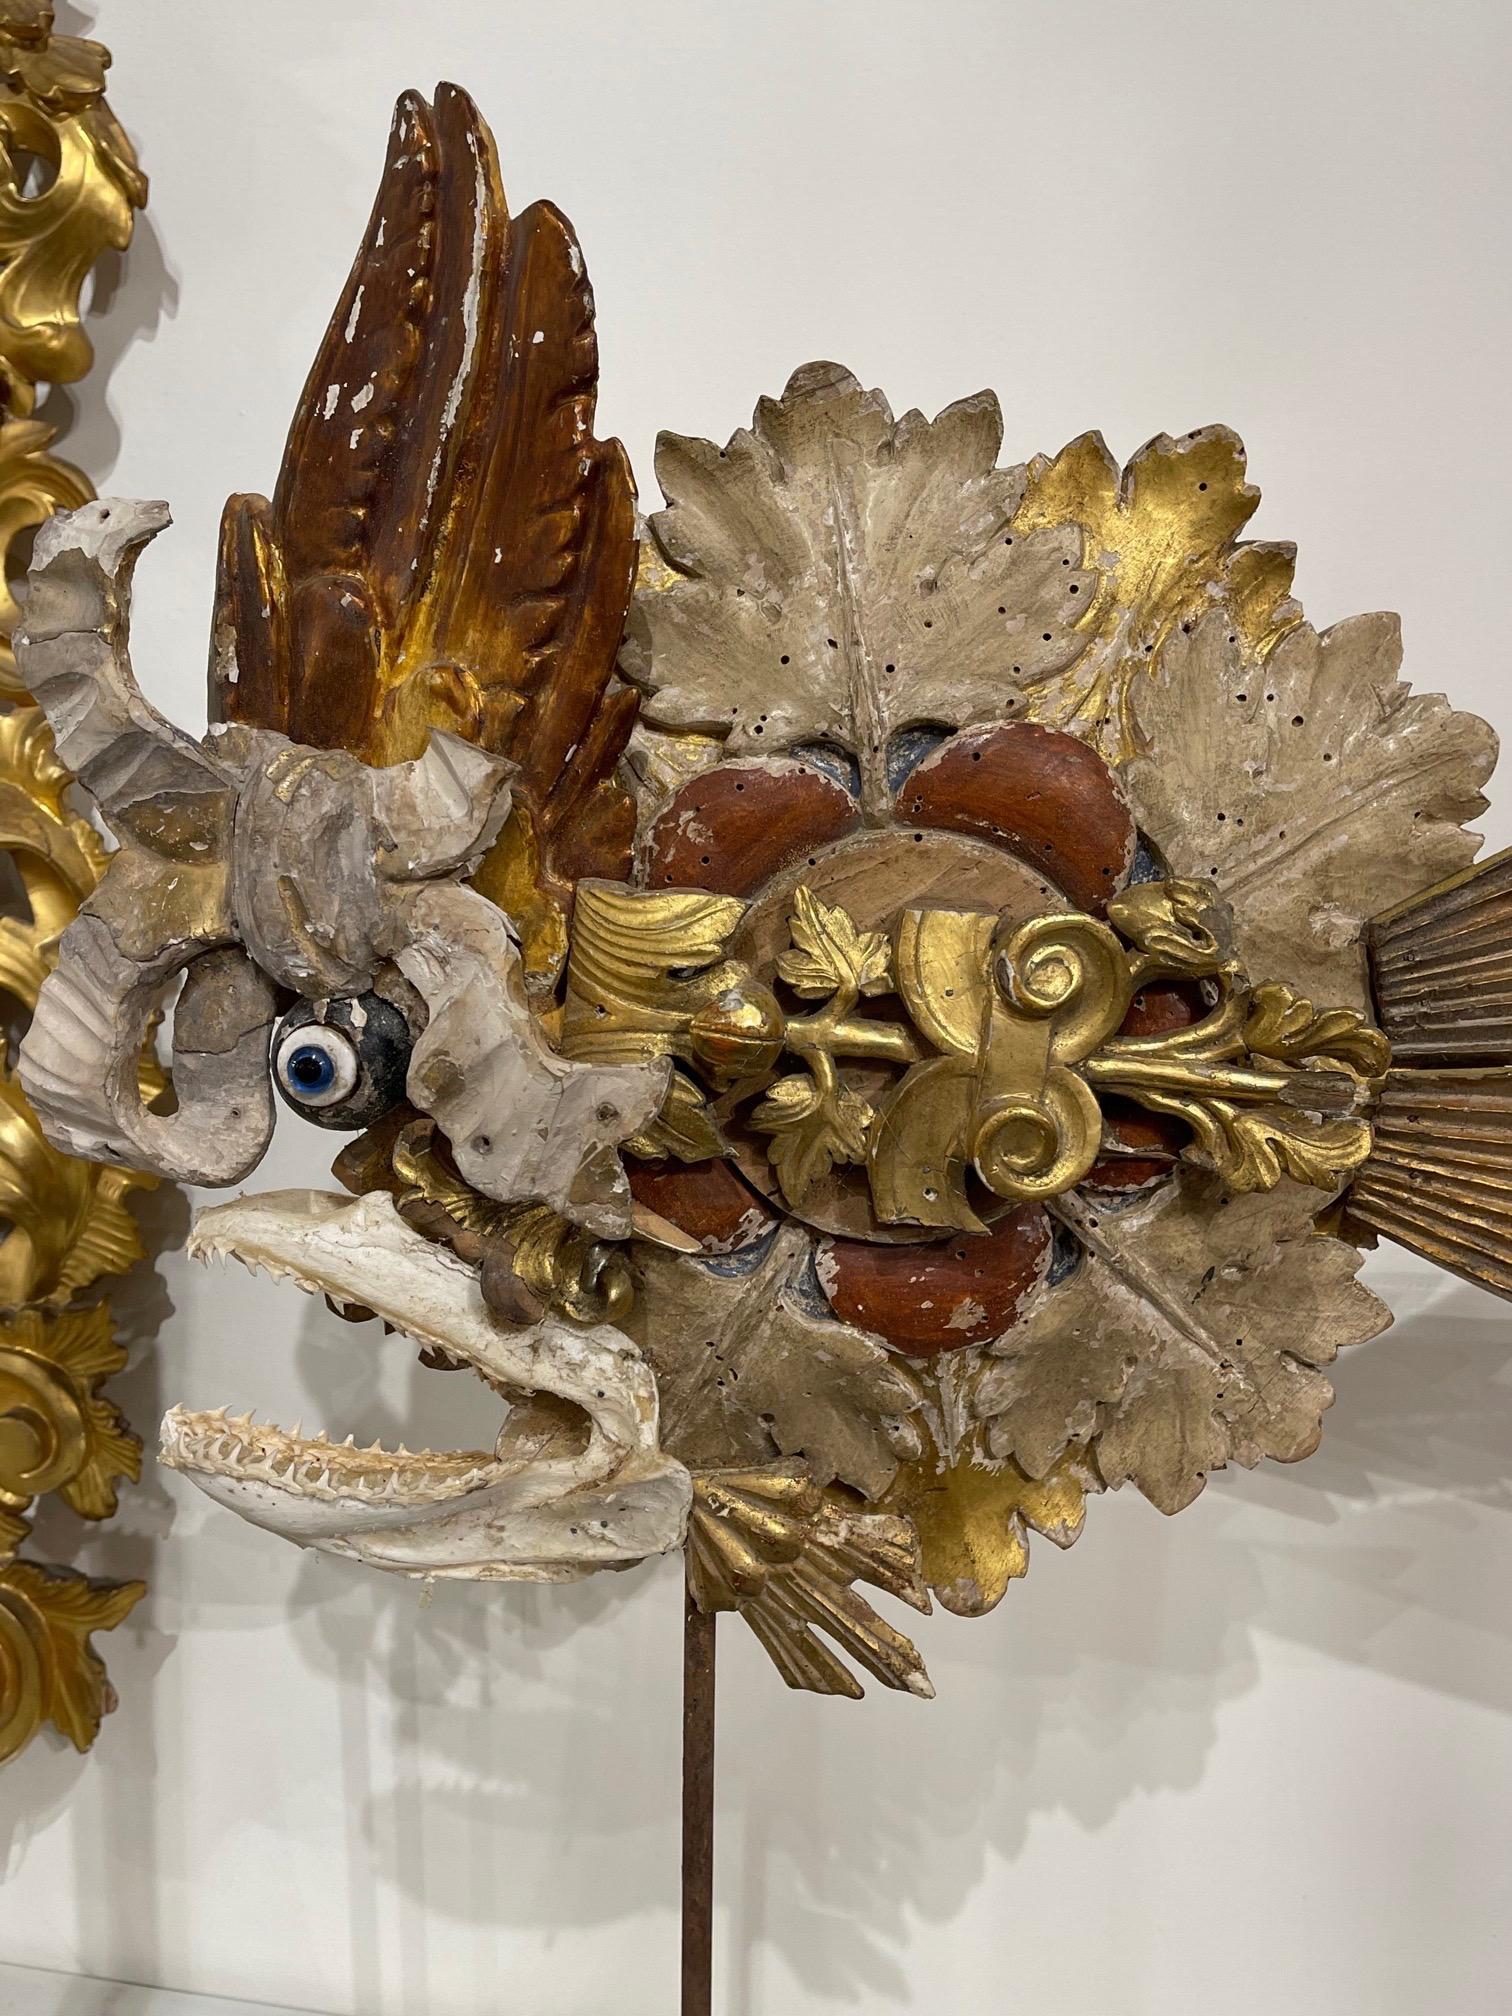 Fabulous Italian fish sculpture made from fragments from the 18th and 19th century. An interesting work of art!